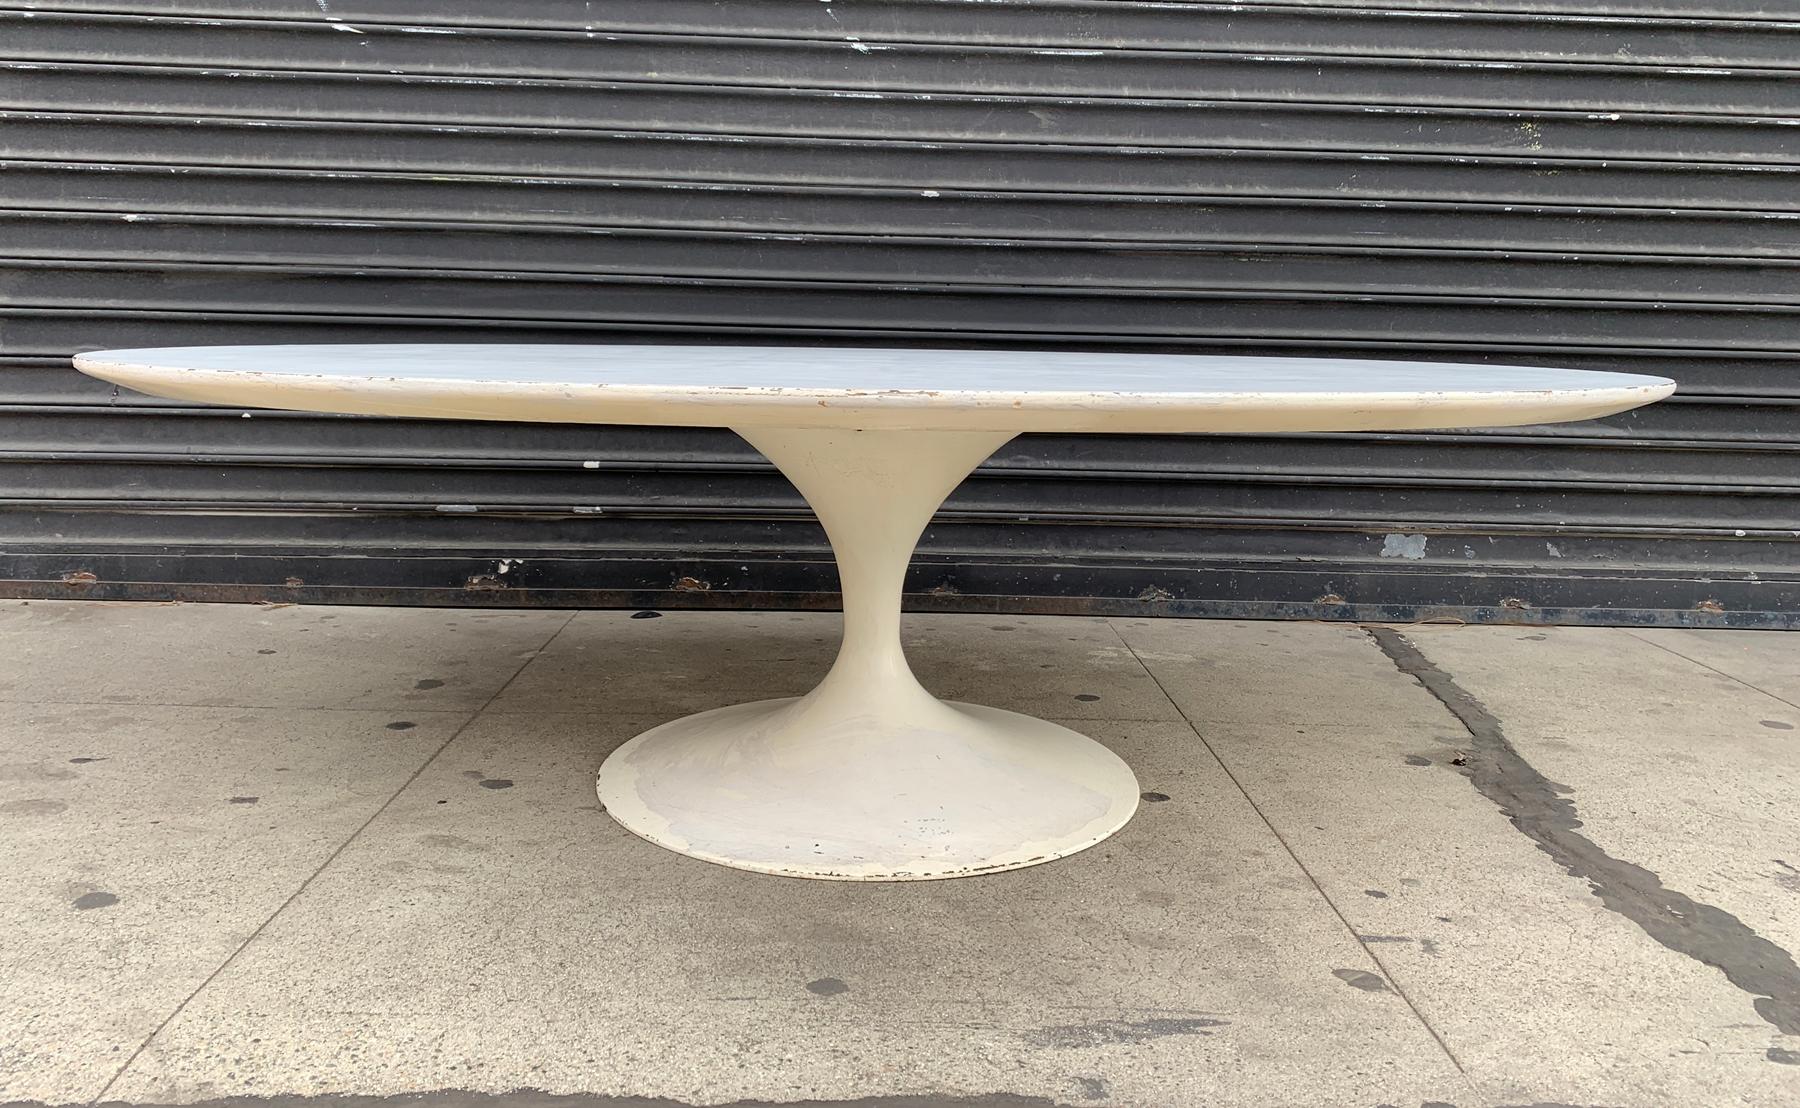 Vintage oval coffee table designed by Eero Saarinen and manufactured by Knoll International, this is a vintage piece from the 1960s and shows its age, the whole table needs to be refinished, no structural issues, the table is